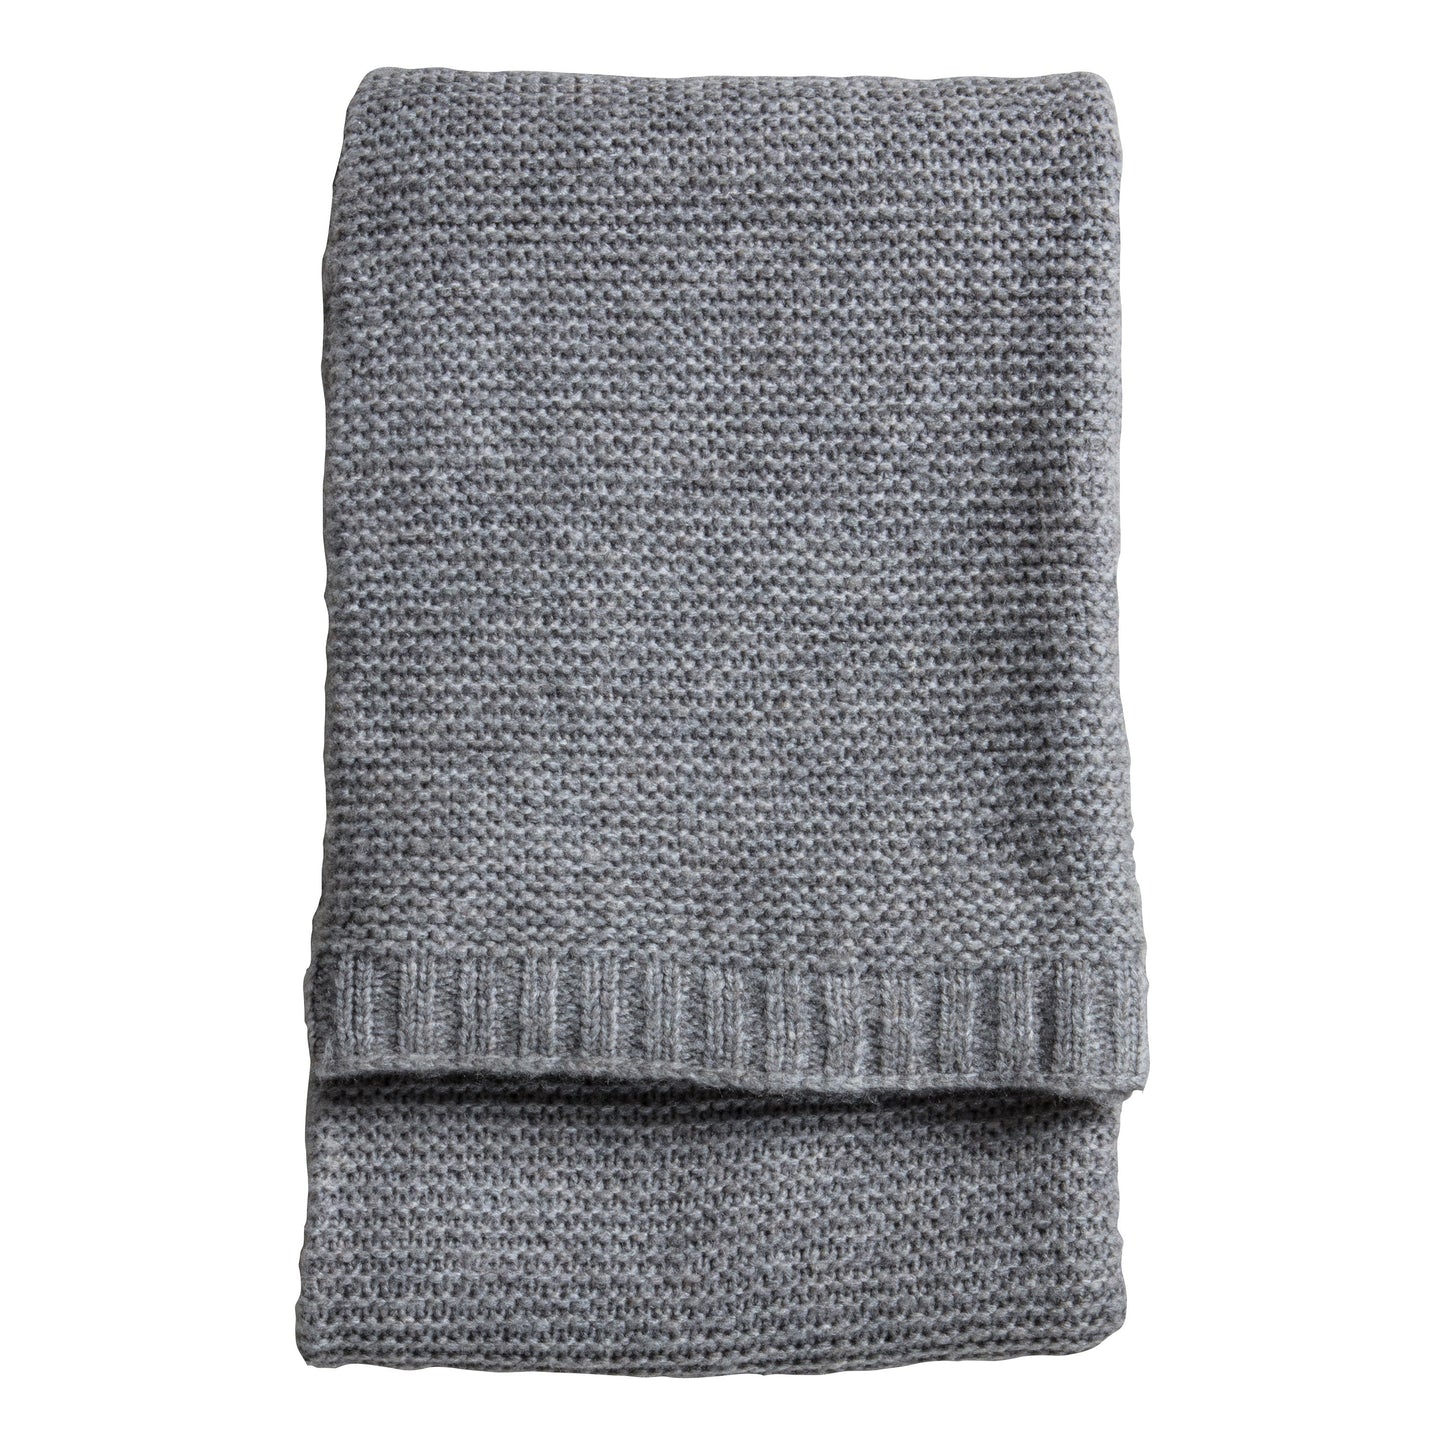 Chunky Knitted Throw Grey 1300x1700mm